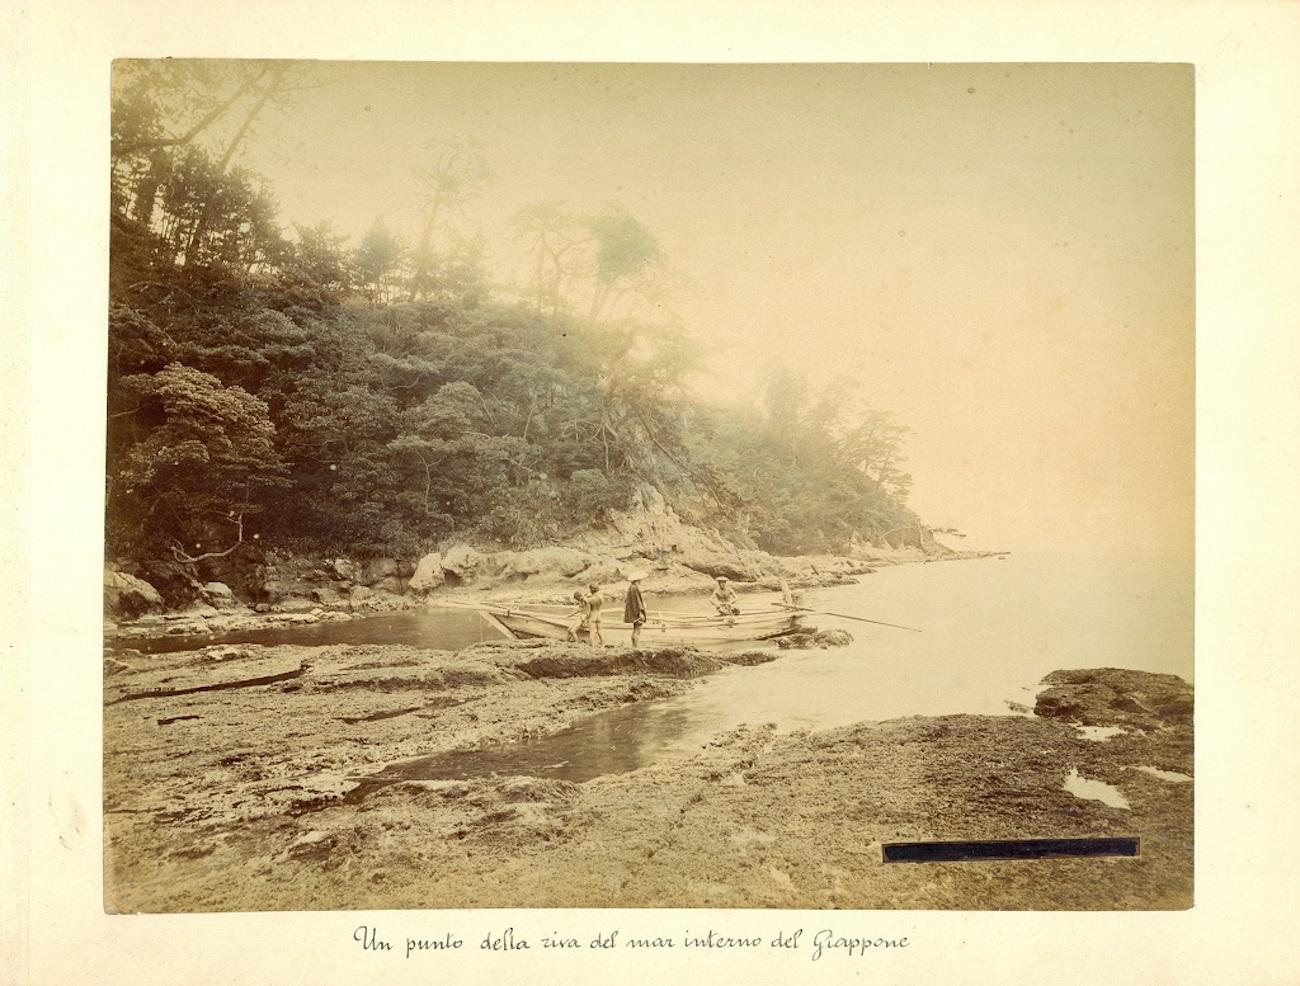 Unknown Black and White Photograph - View of a Bay in the Seto Inland Sea - Hand-Colored Albumen Print 1870/1890